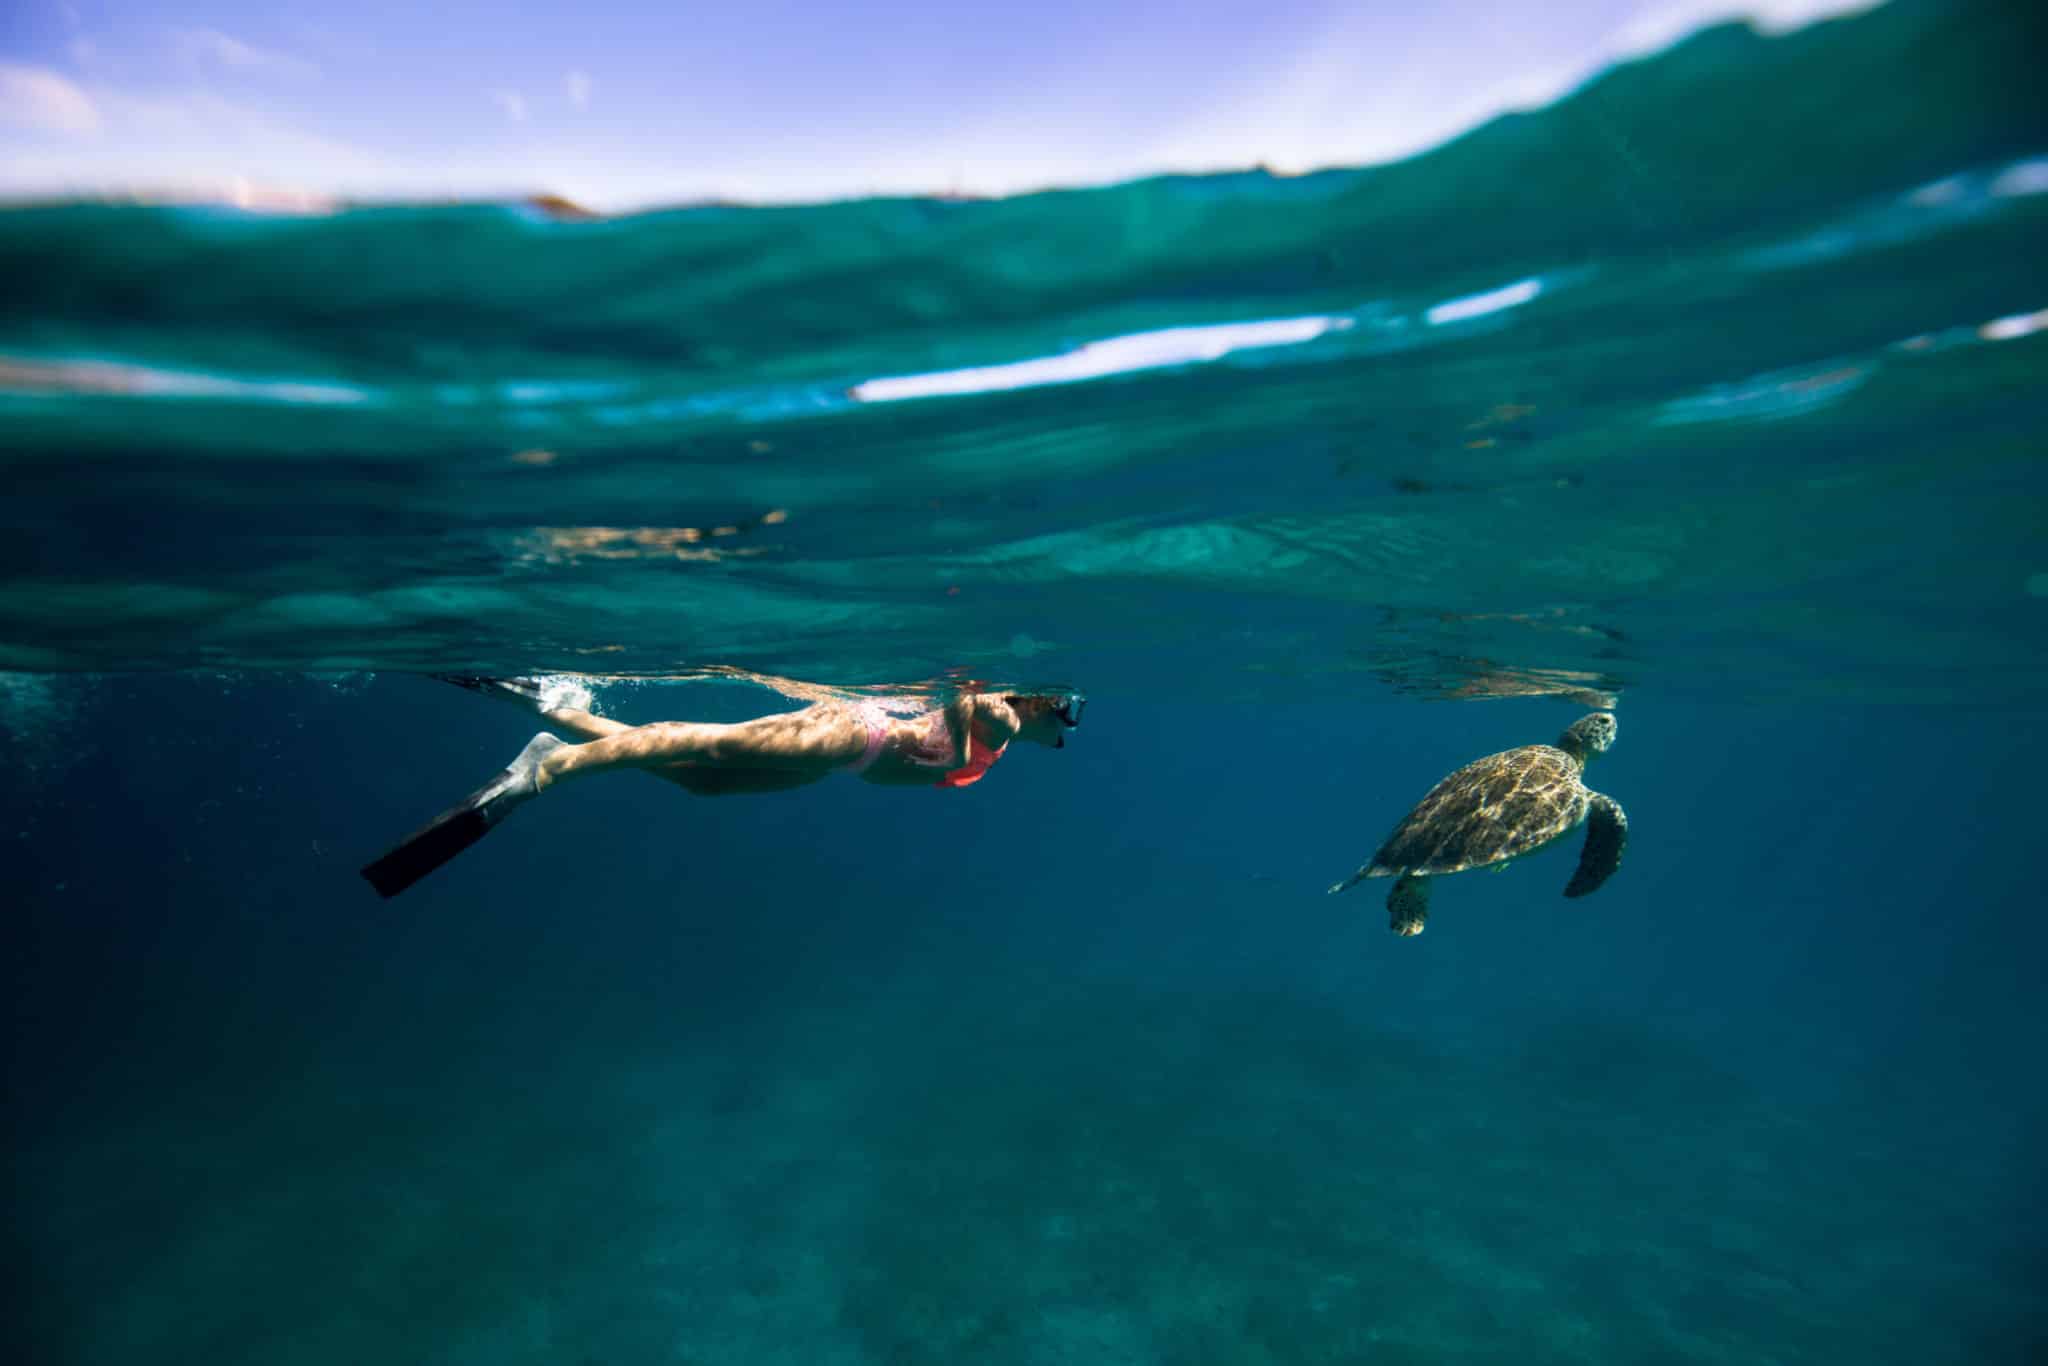 You can’t come to St. Thomas and not swim with sea turtles.  You’ll find them playing in the waters all over the USVI,  but one of the best spots is Magens Bay.  Go on a calm day for ideal conditions.